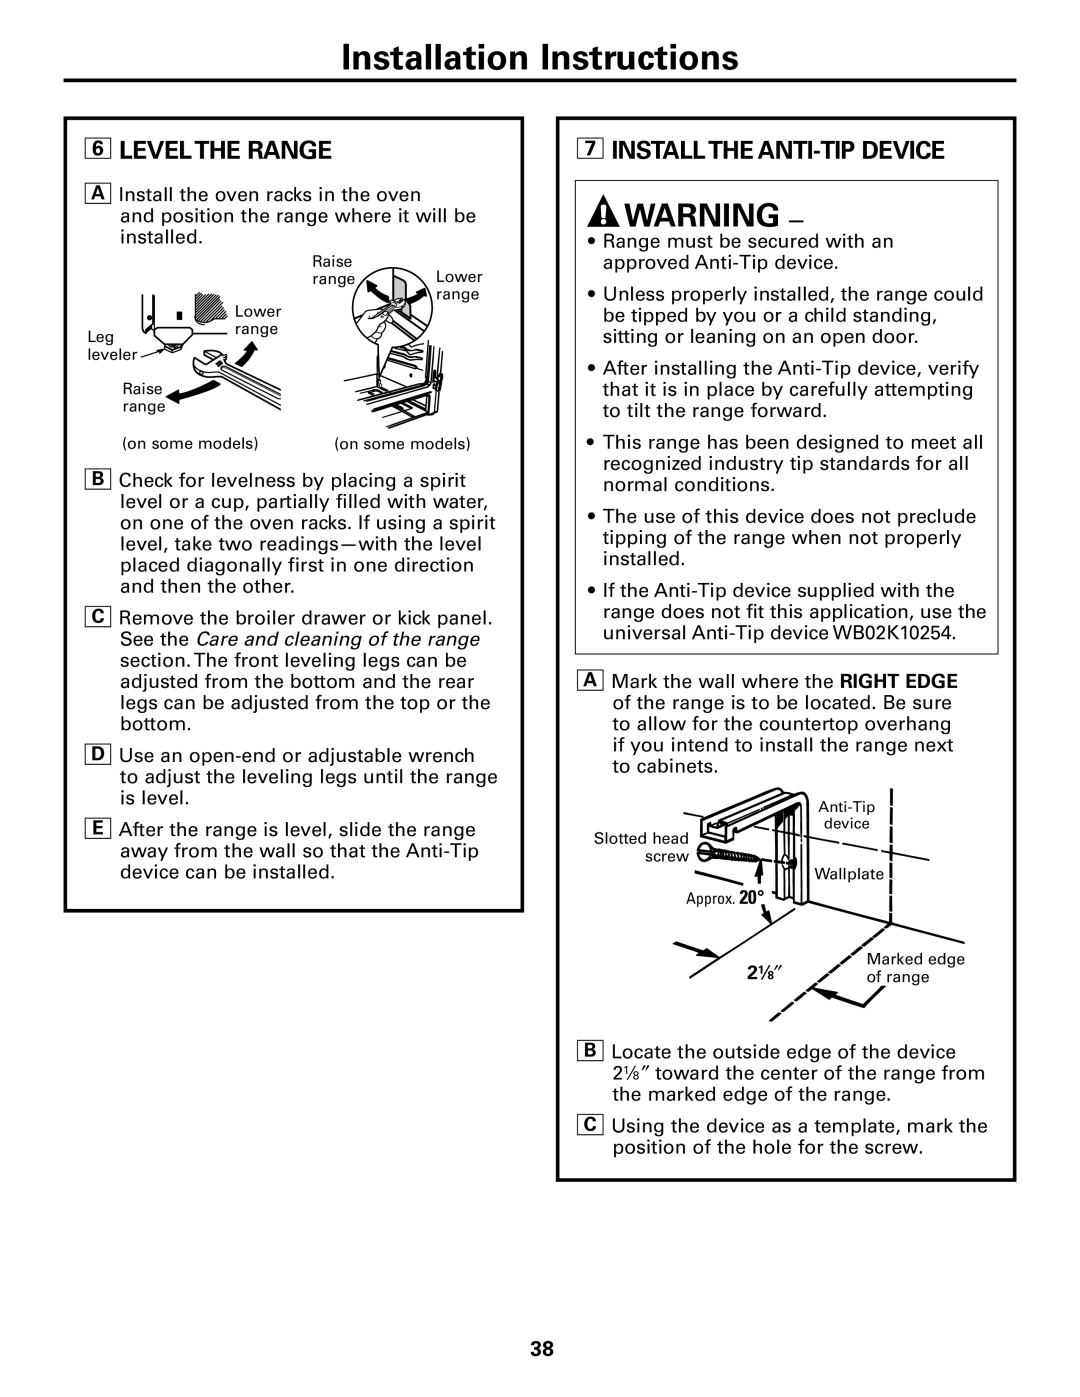 Americana Appliances AGBS300 Warning, 6LEVELTHE RANGE, 7INSTALLTHE ANTI-TIPDEVICE, Installation Instructions, 21⁄8″ 